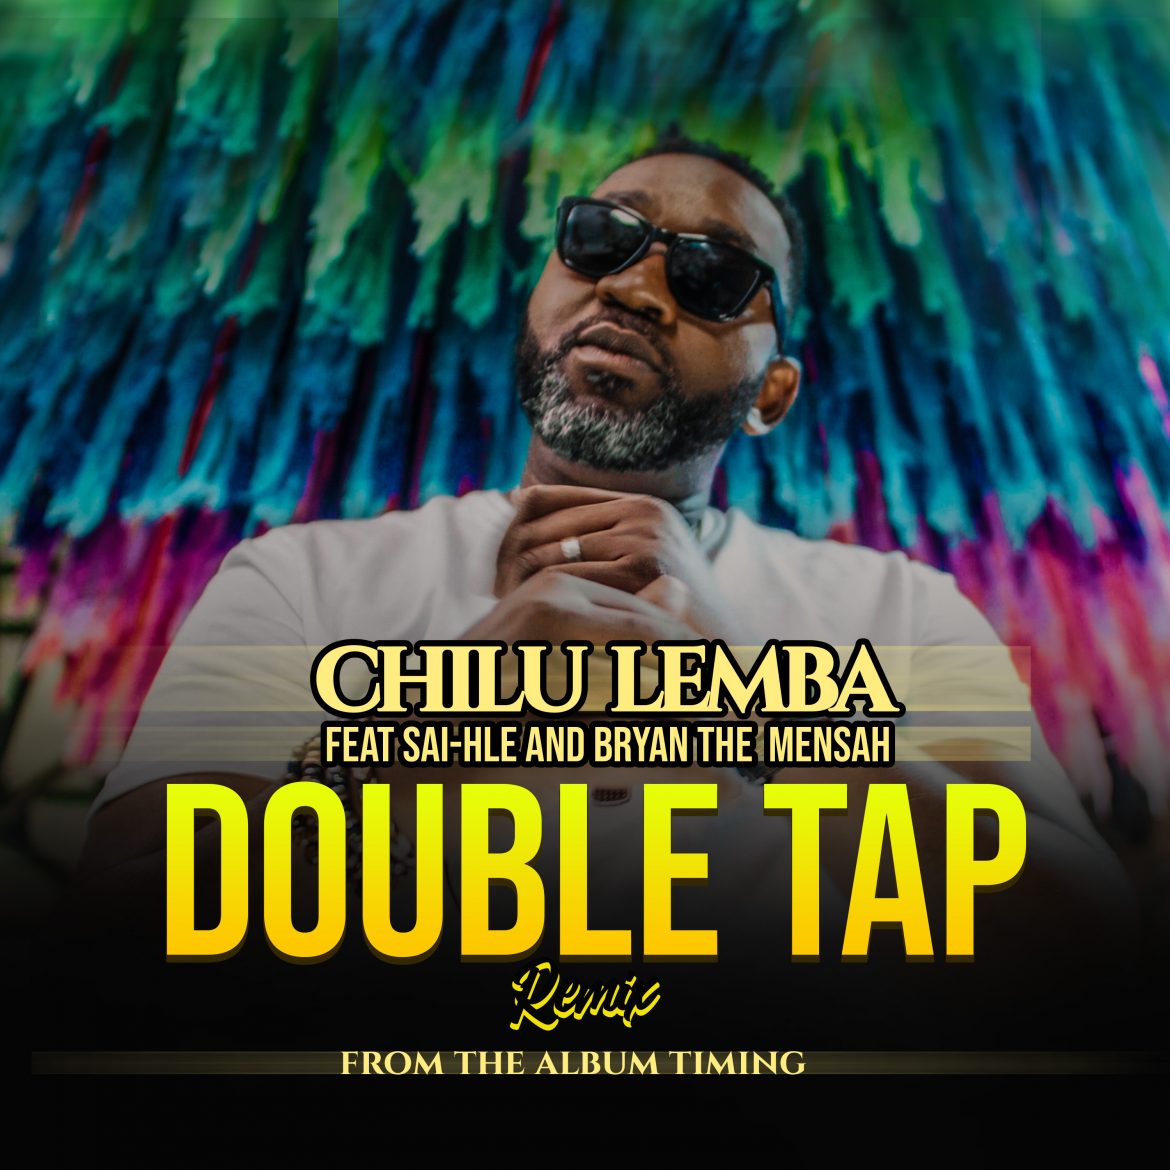 VIDEO DEBUT – Celebrated Zambian Hip Hop pioneer Chilu Lemba releases first single DOUBLE TAP (remix) off his brand new album Timing